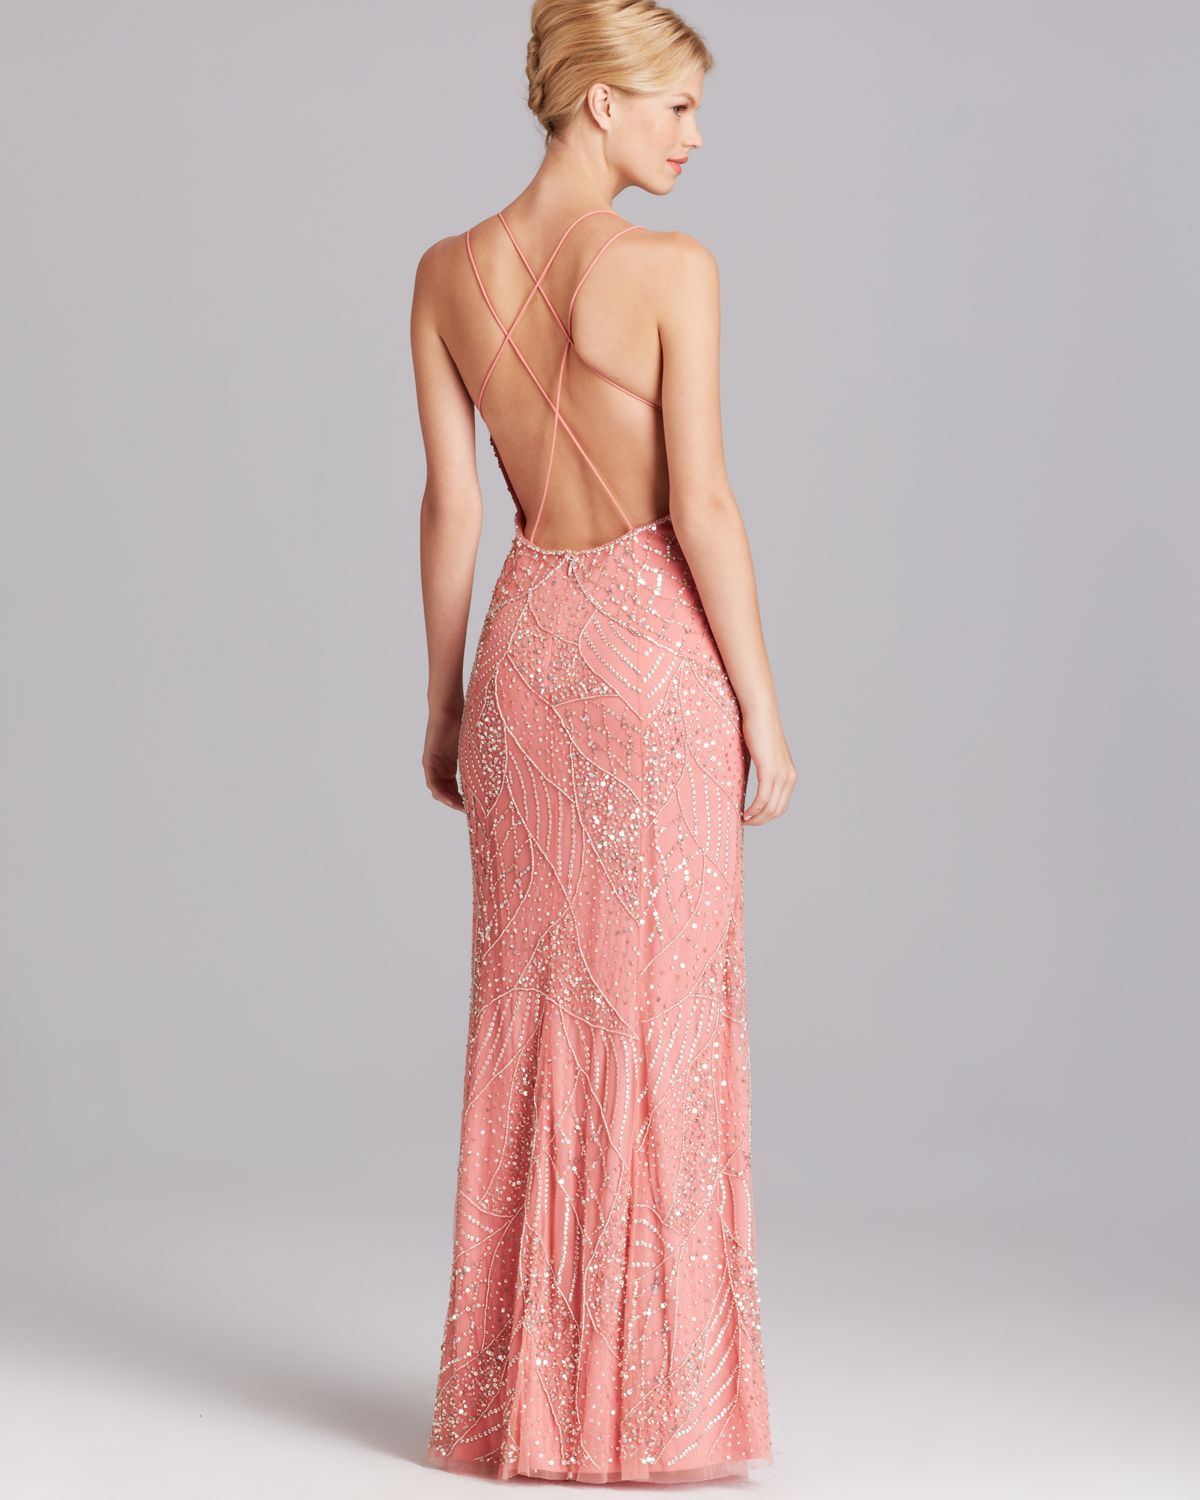 adrianna papell pink gown spaghetti strap beaded open back gowns product 1 18742836 1 483453795 normal